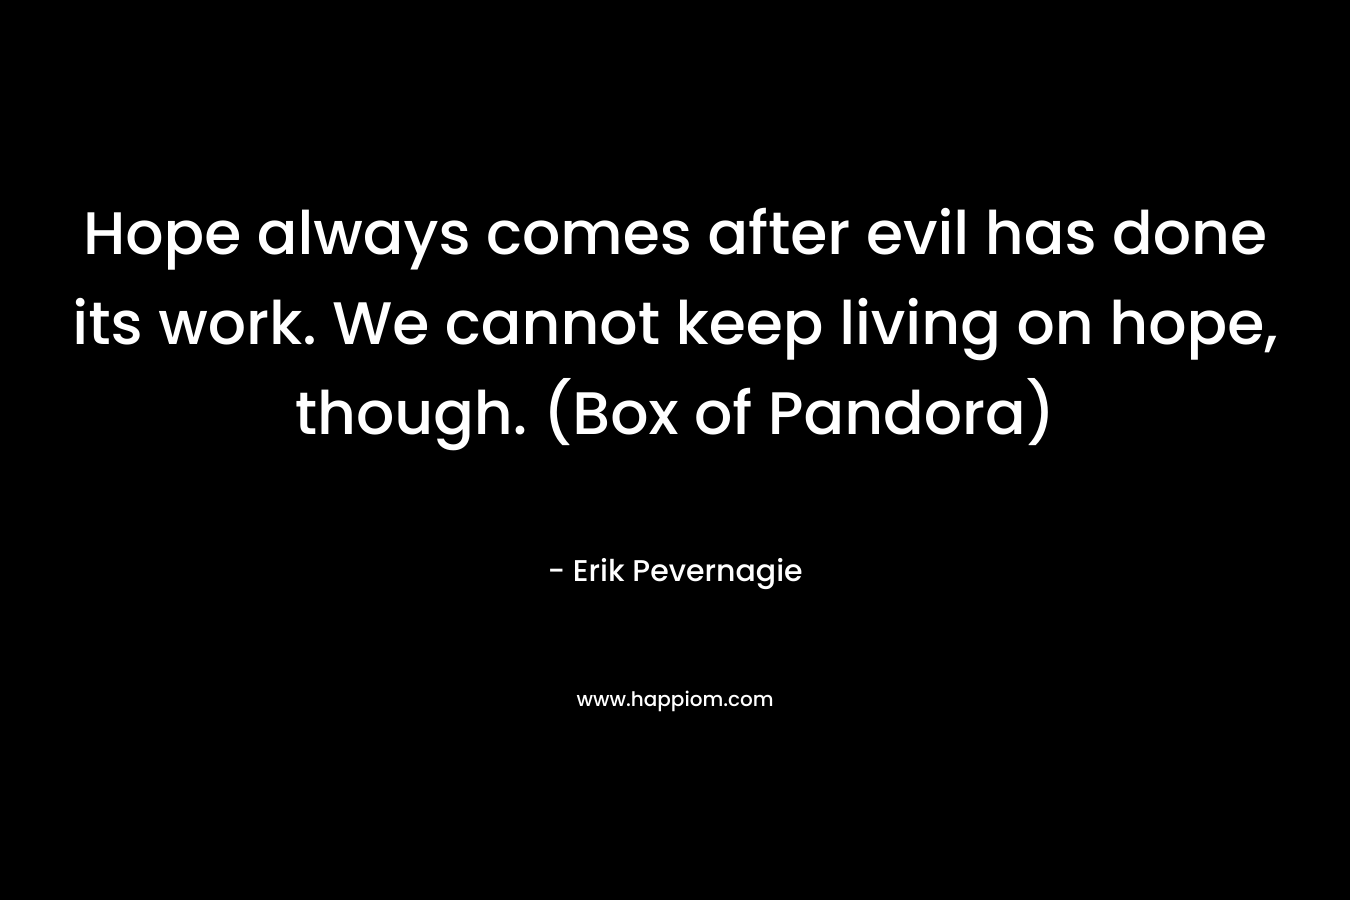 Hope always comes after evil has done its work. We cannot keep living on hope, though. (Box of Pandora)